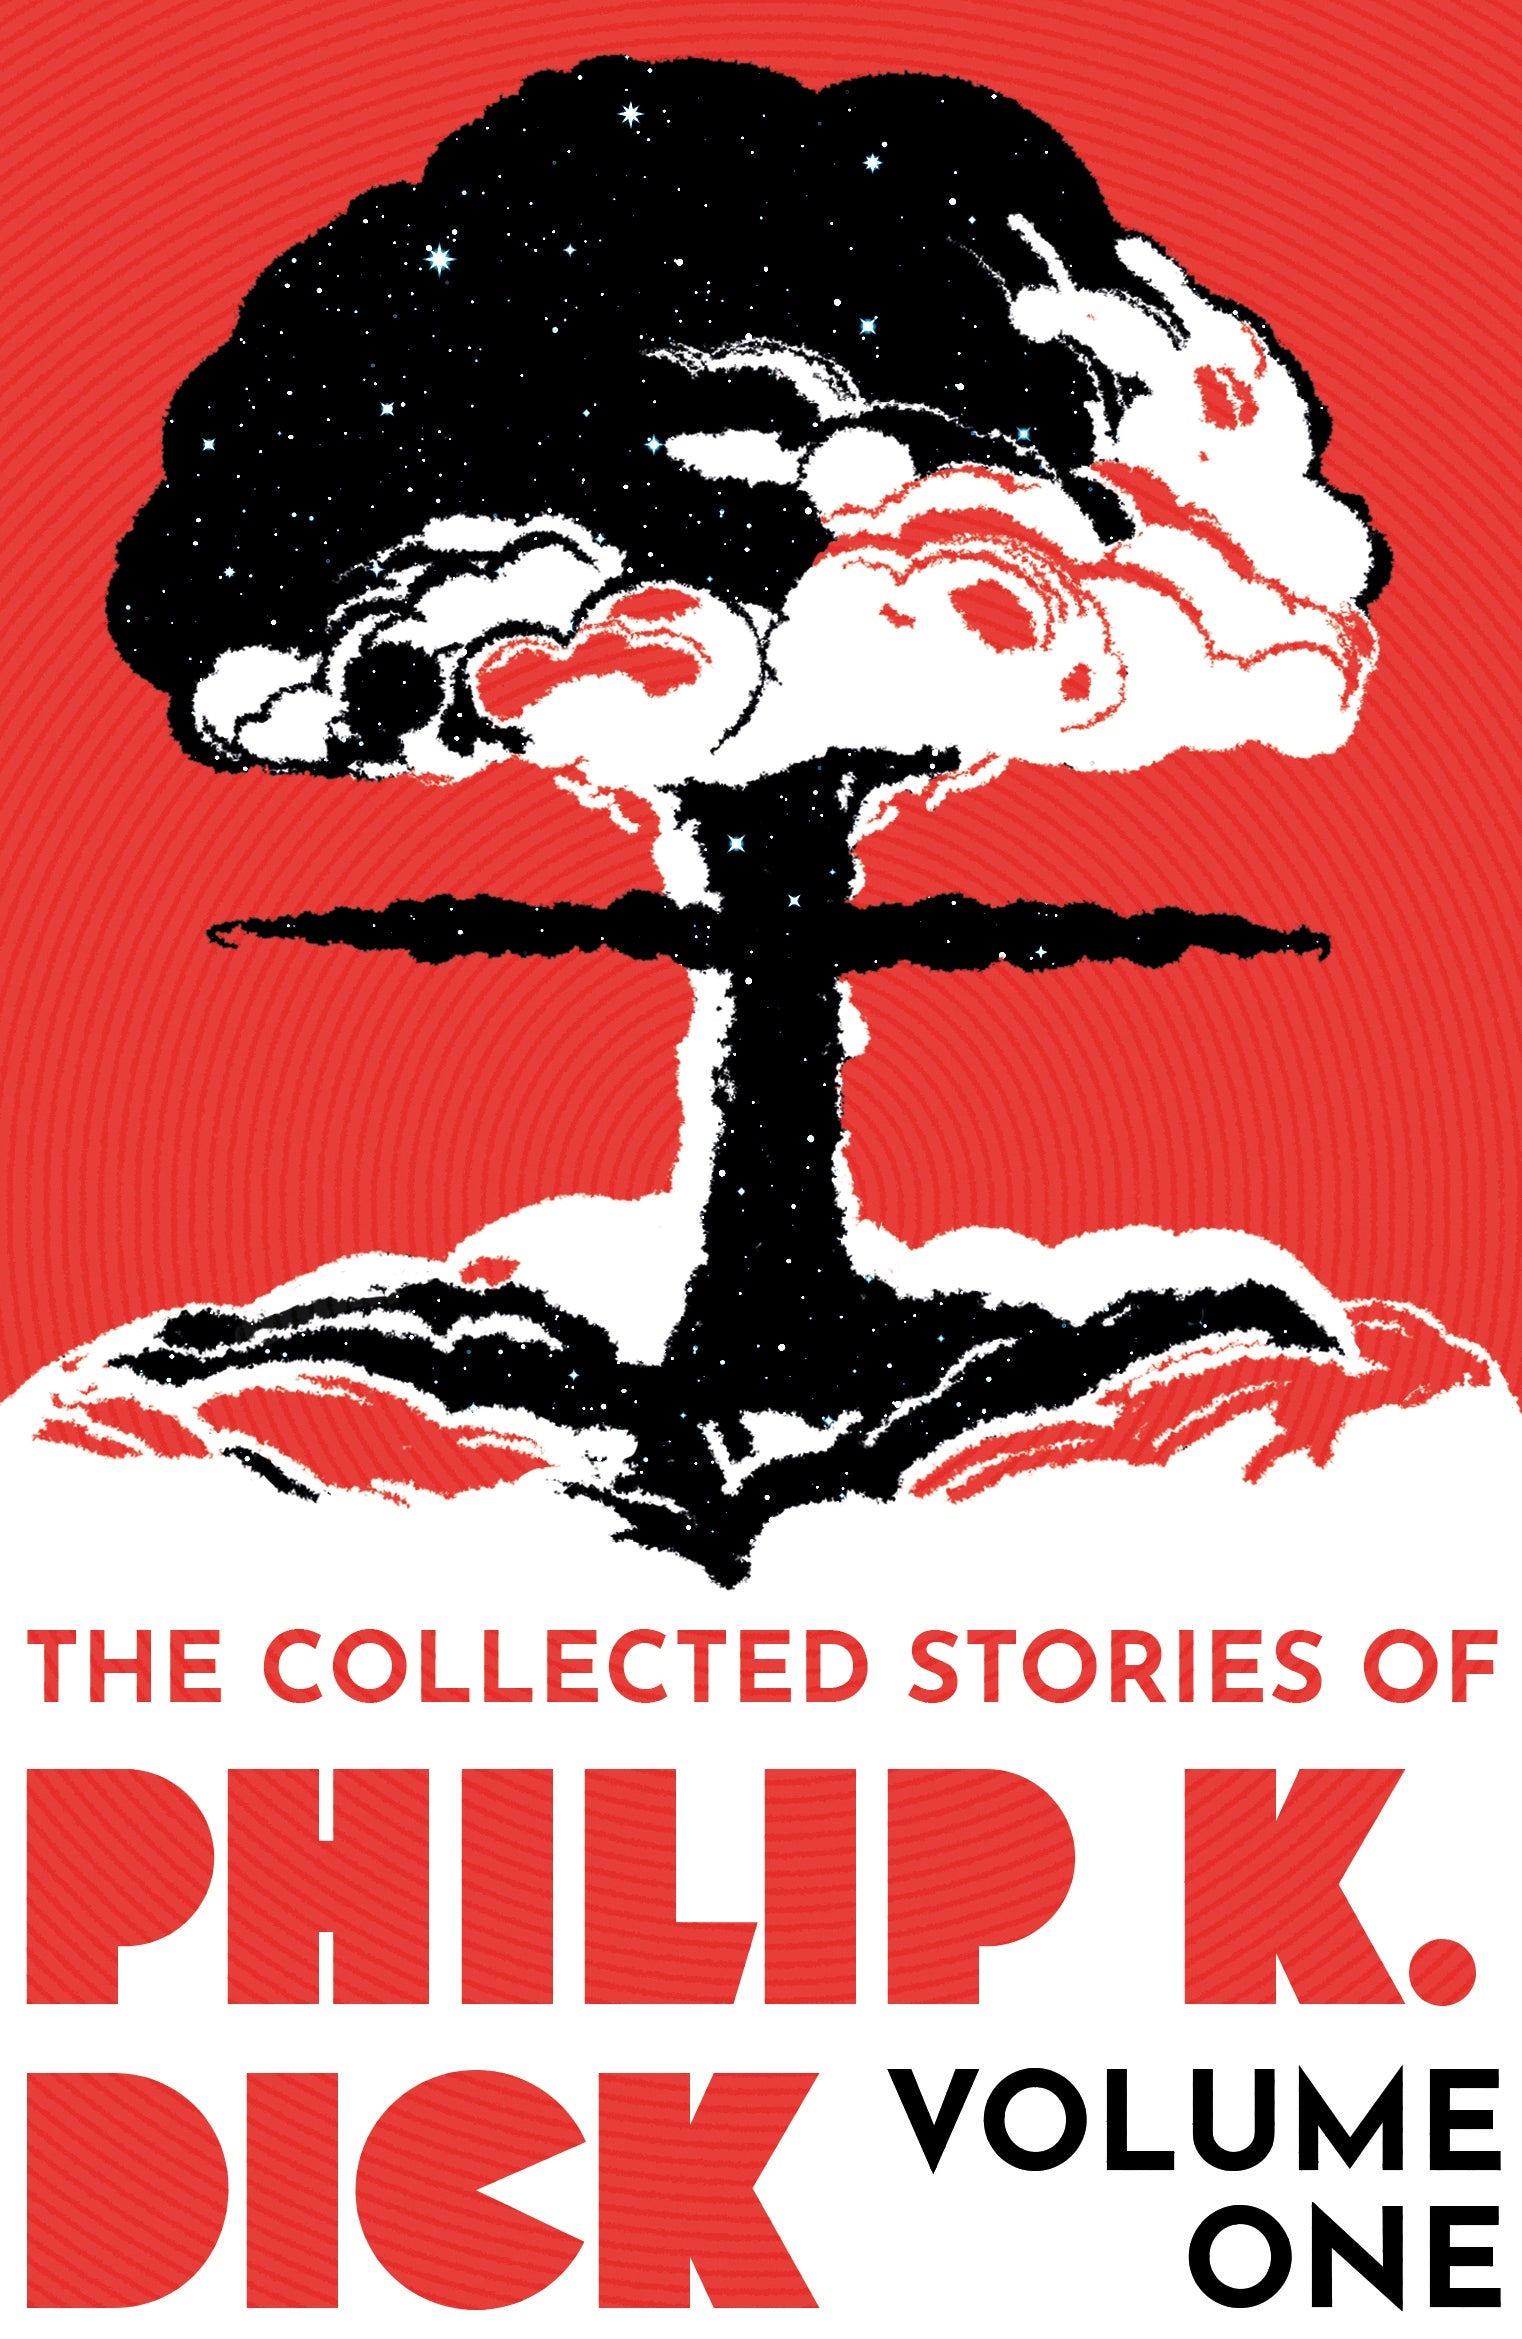 The Collected Stories of Philip K. Dick Volume 1 by Philip K Dick